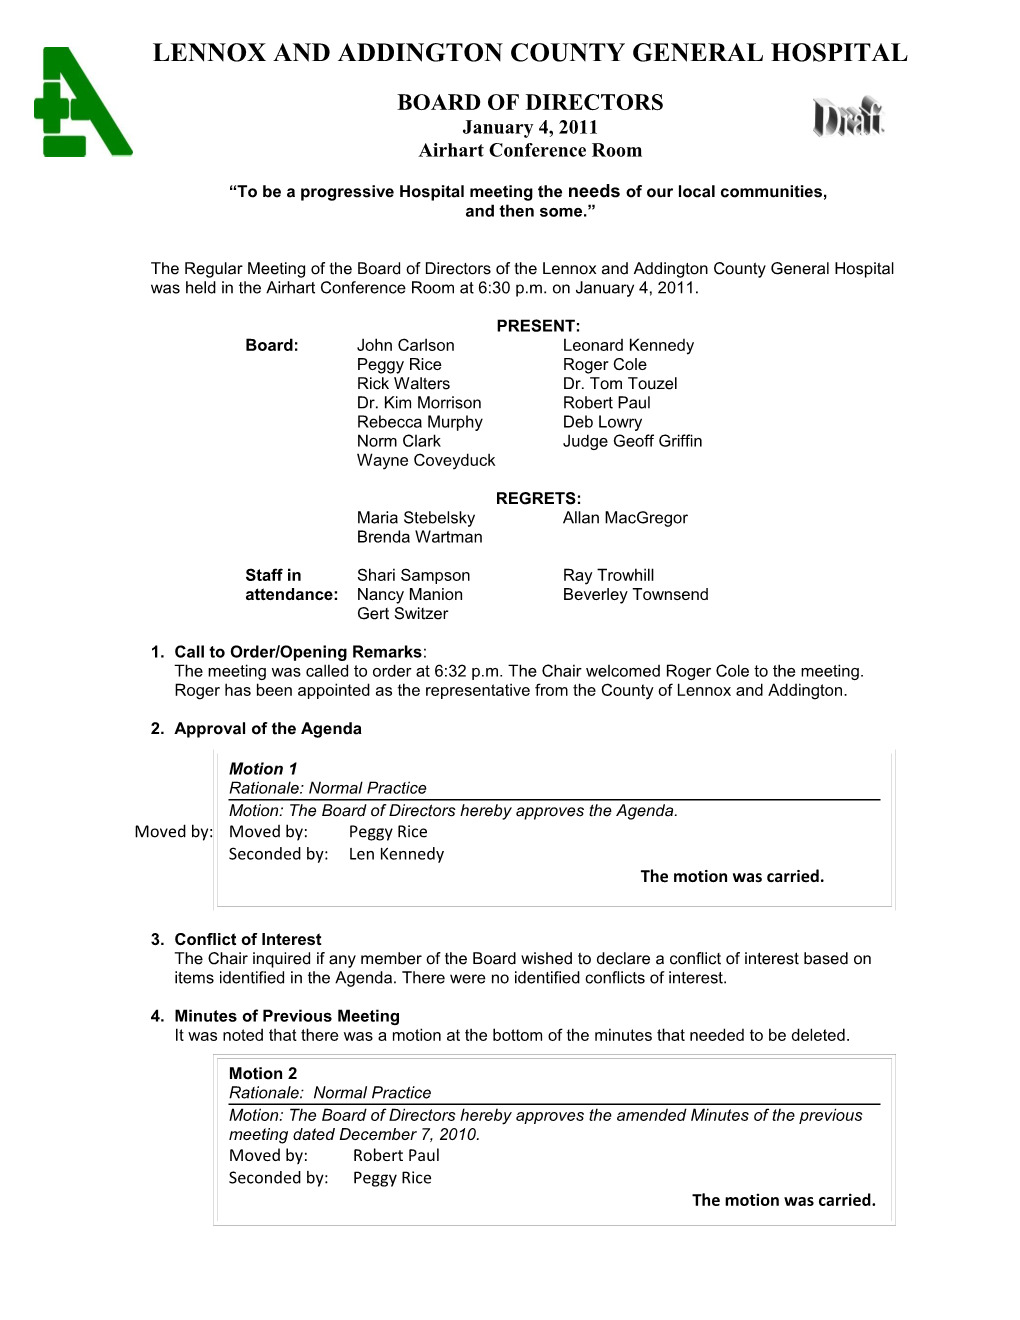 Report of the Medical Advisory Committee Meeting Held March 5, 2009